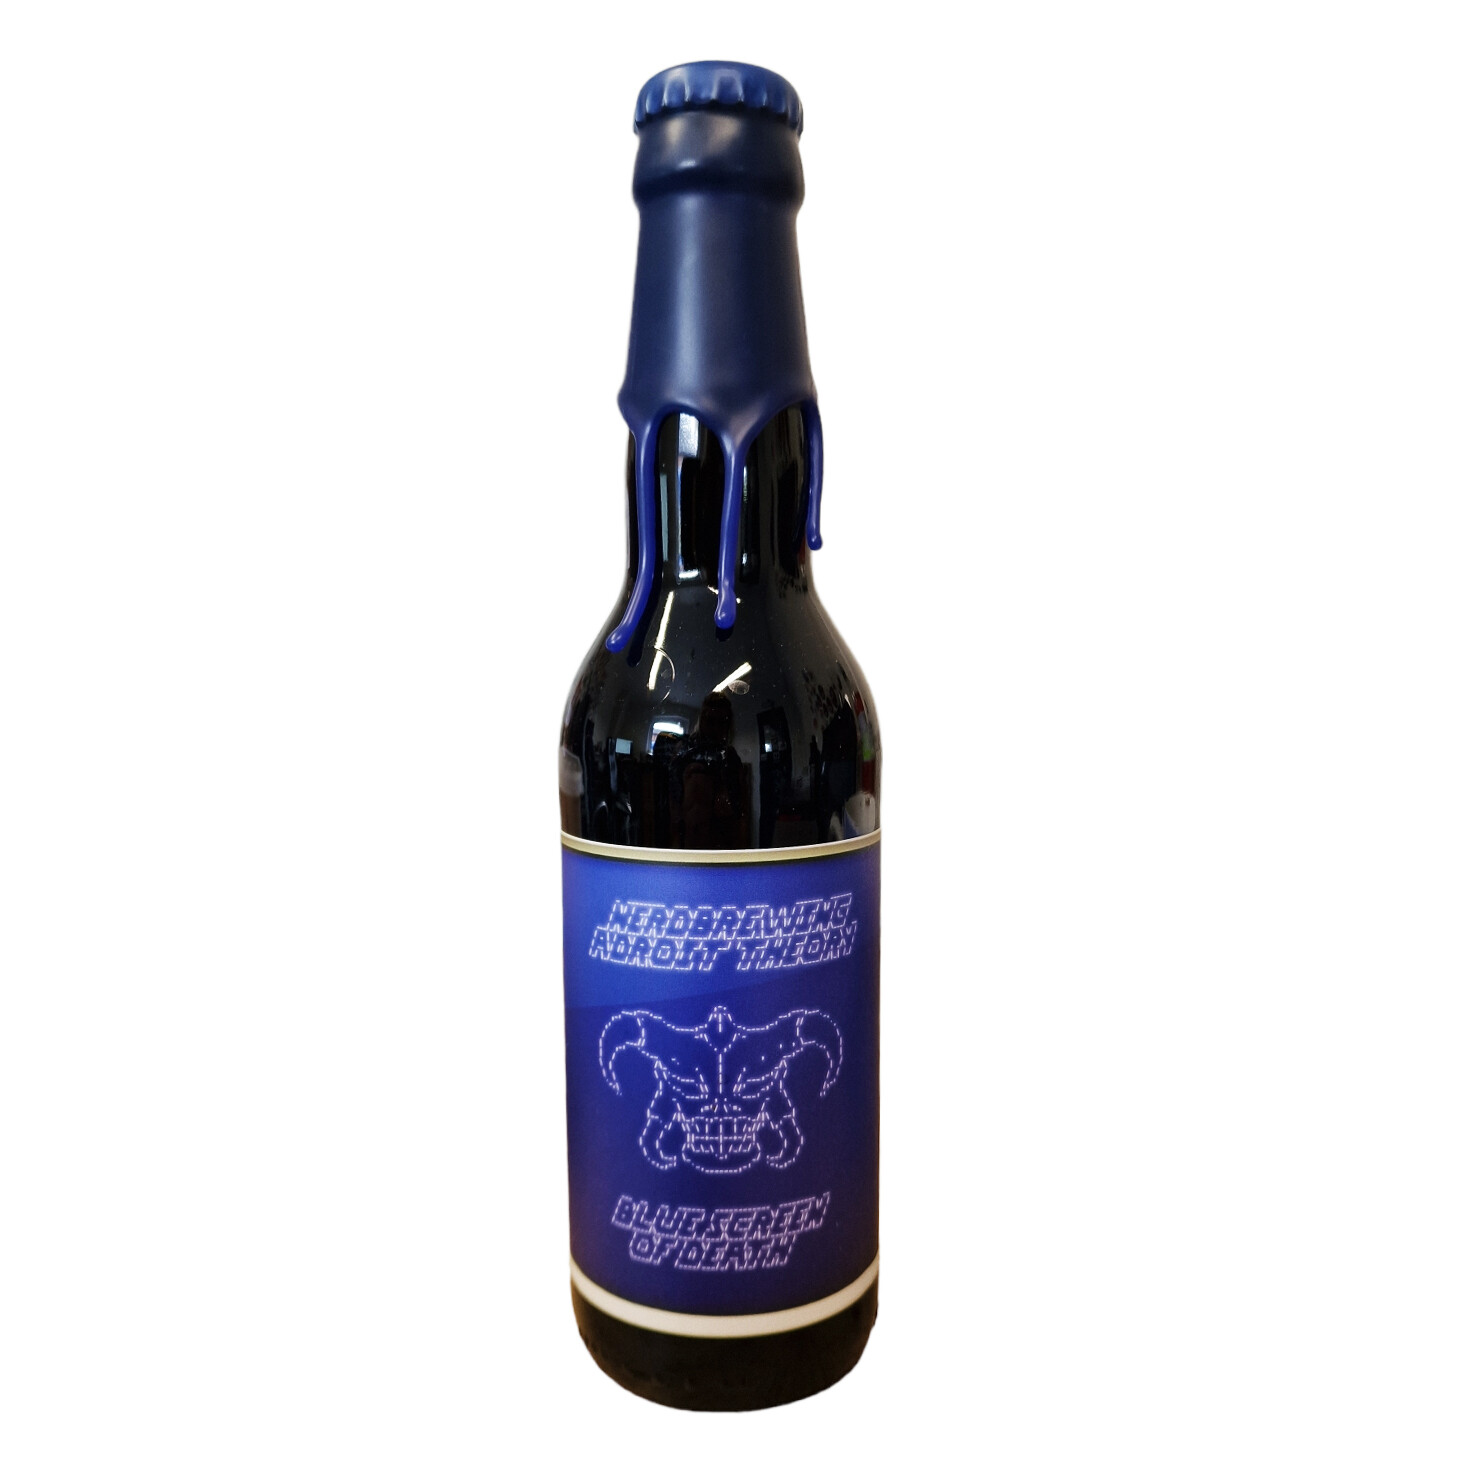 Nerdbrewing x Adroit Theory Blue Screen of Death Imperial Stout